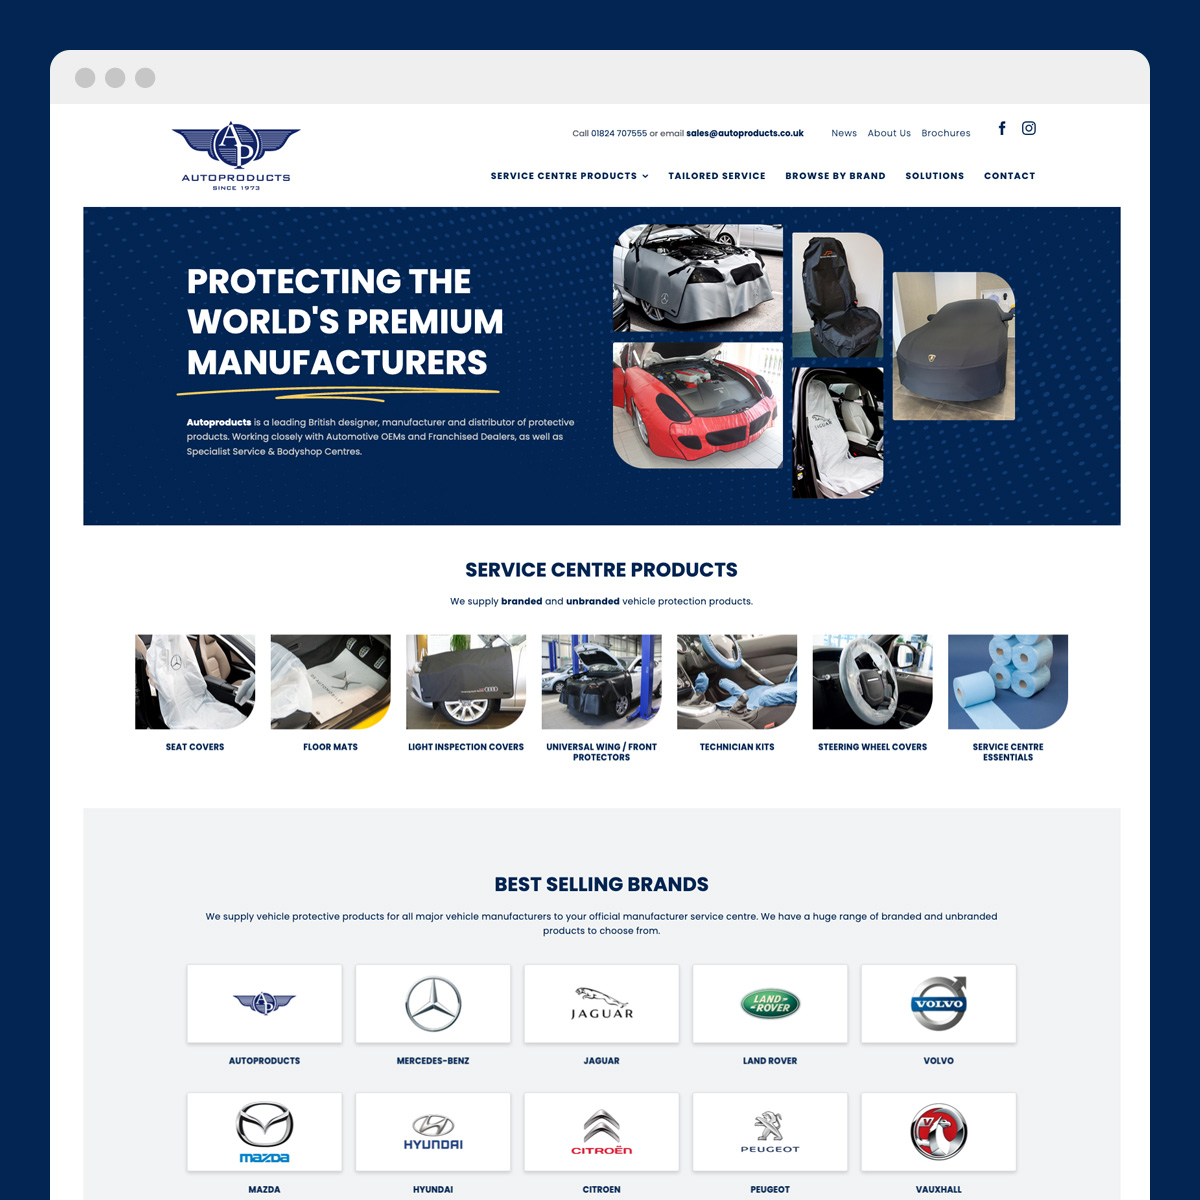 Autoproducts.co.uk